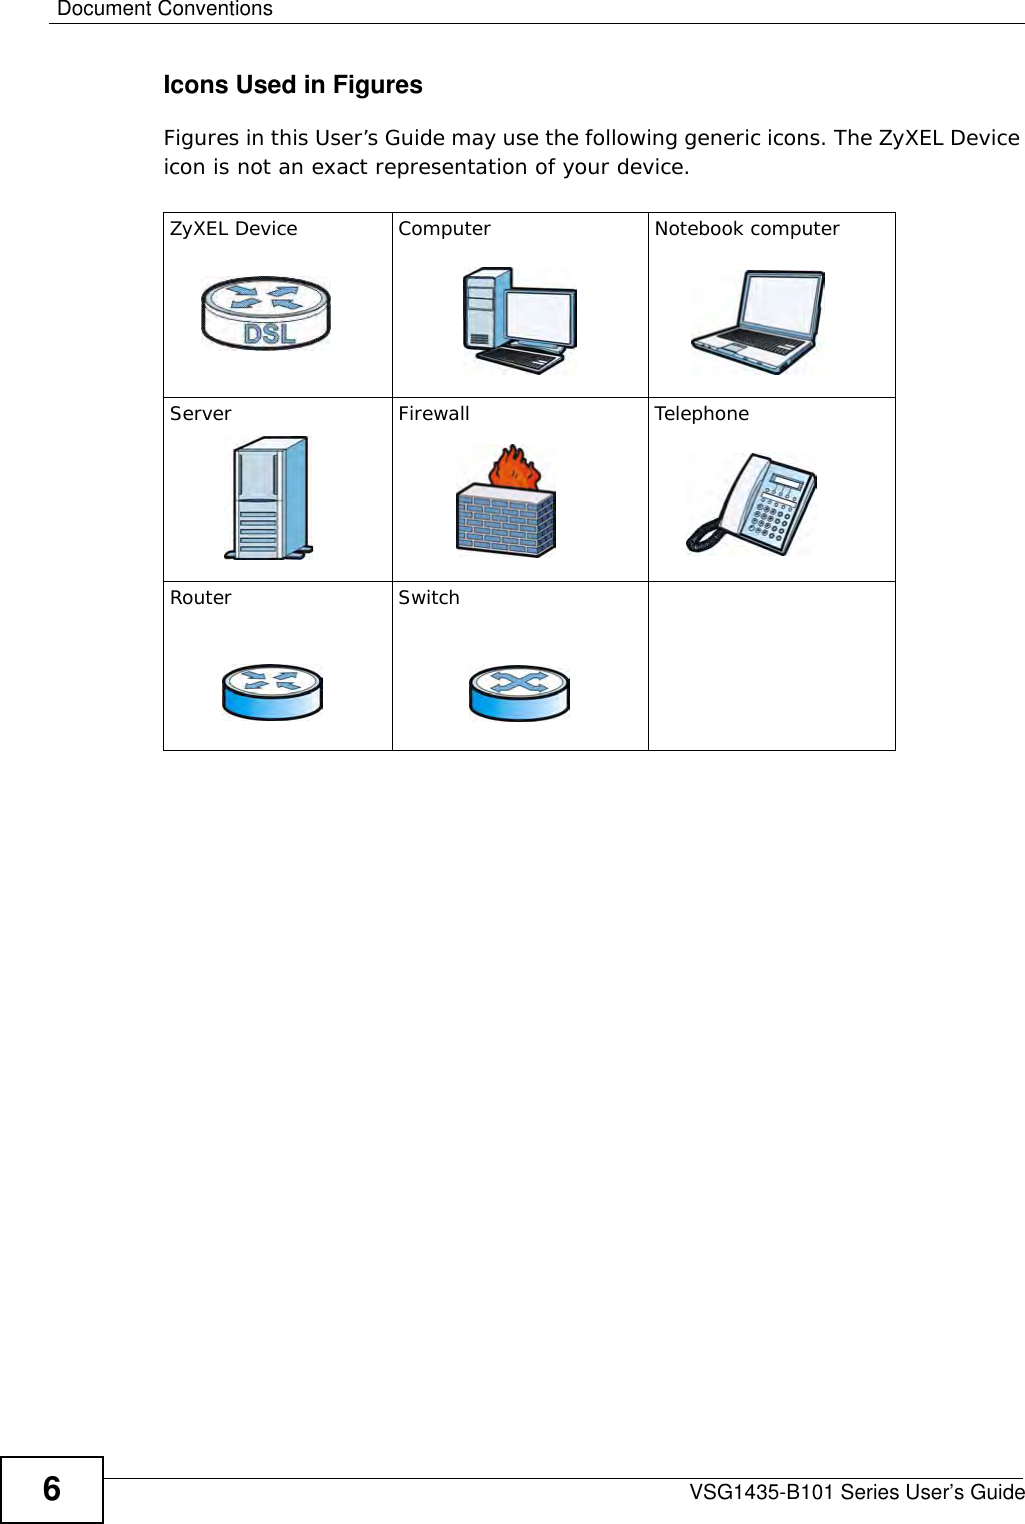 Document ConventionsVSG1435-B101 Series User’s Guide6Icons Used in FiguresFigures in this User’s Guide may use the following generic icons. The ZyXEL Device icon is not an exact representation of your device.ZyXEL Device Computer Notebook computerServer Firewall TelephoneRouter Switch